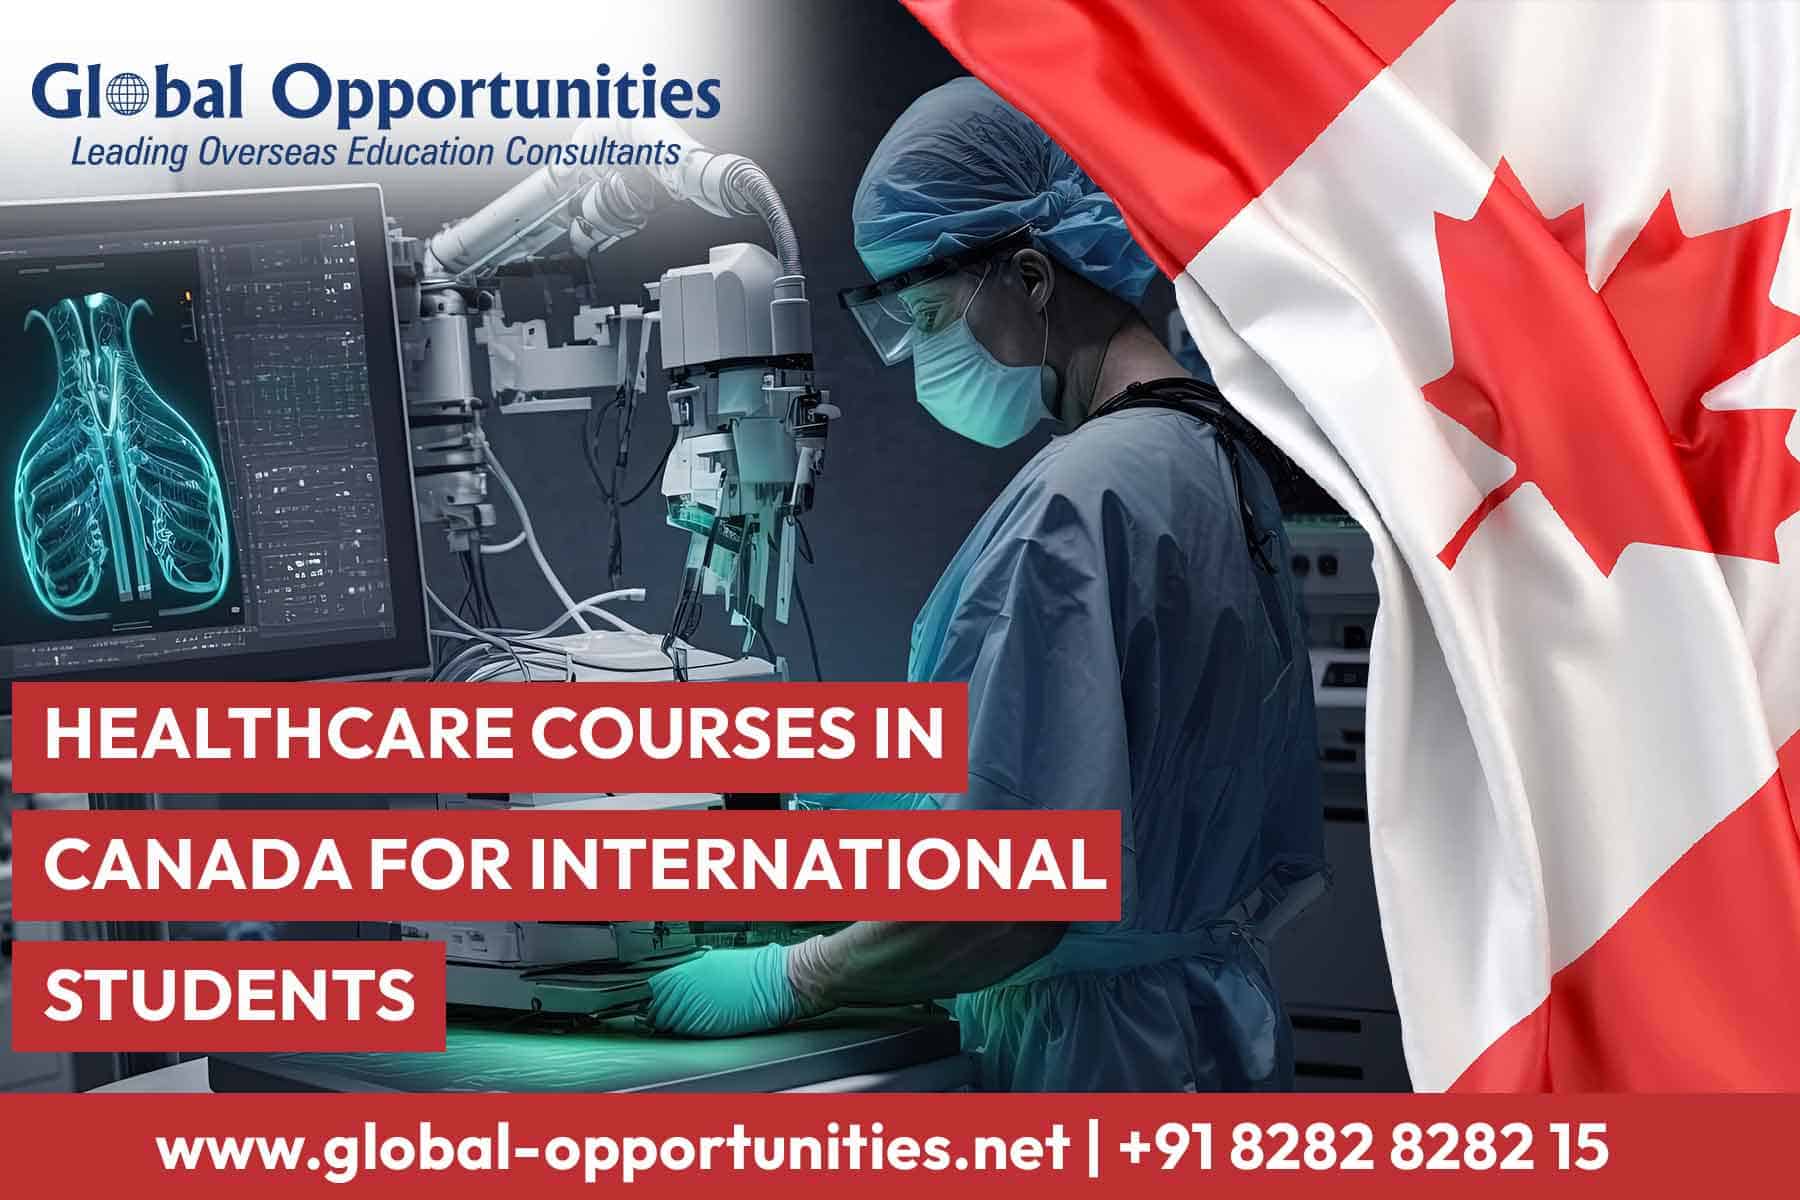 Healthcare Courses in Canada for International Students